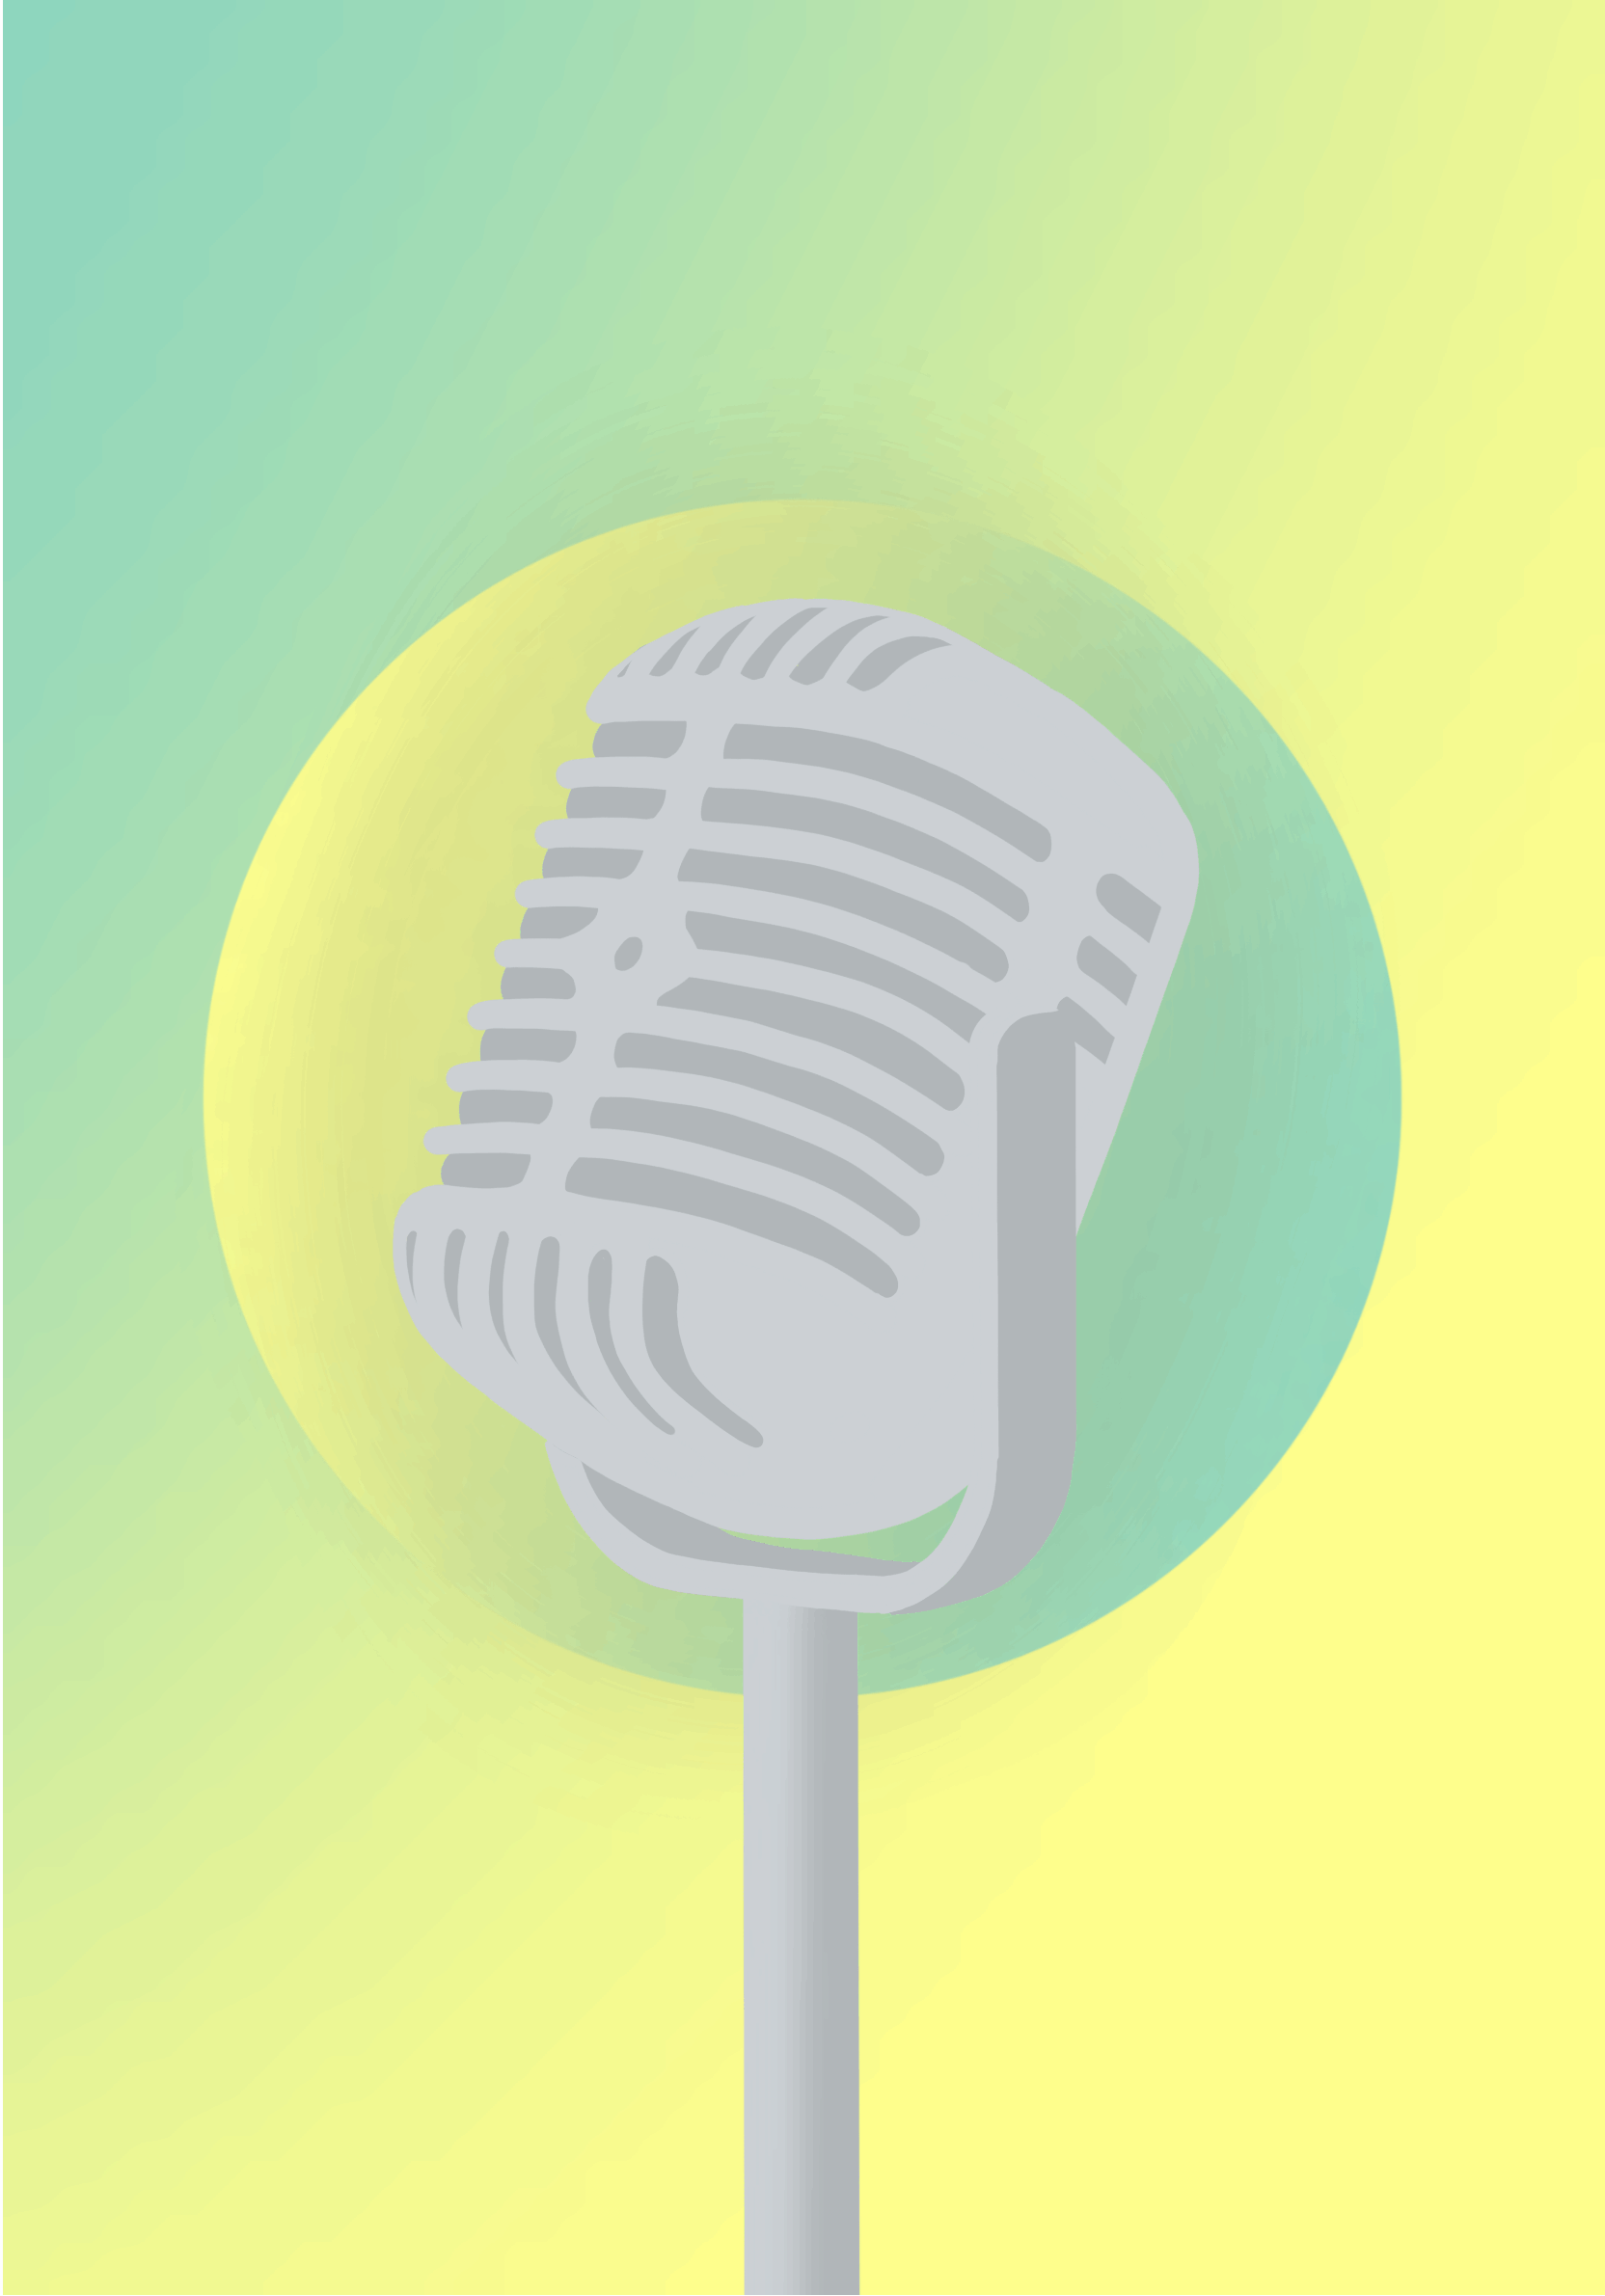 Grey microphone on green and yellow background pops out different icons.